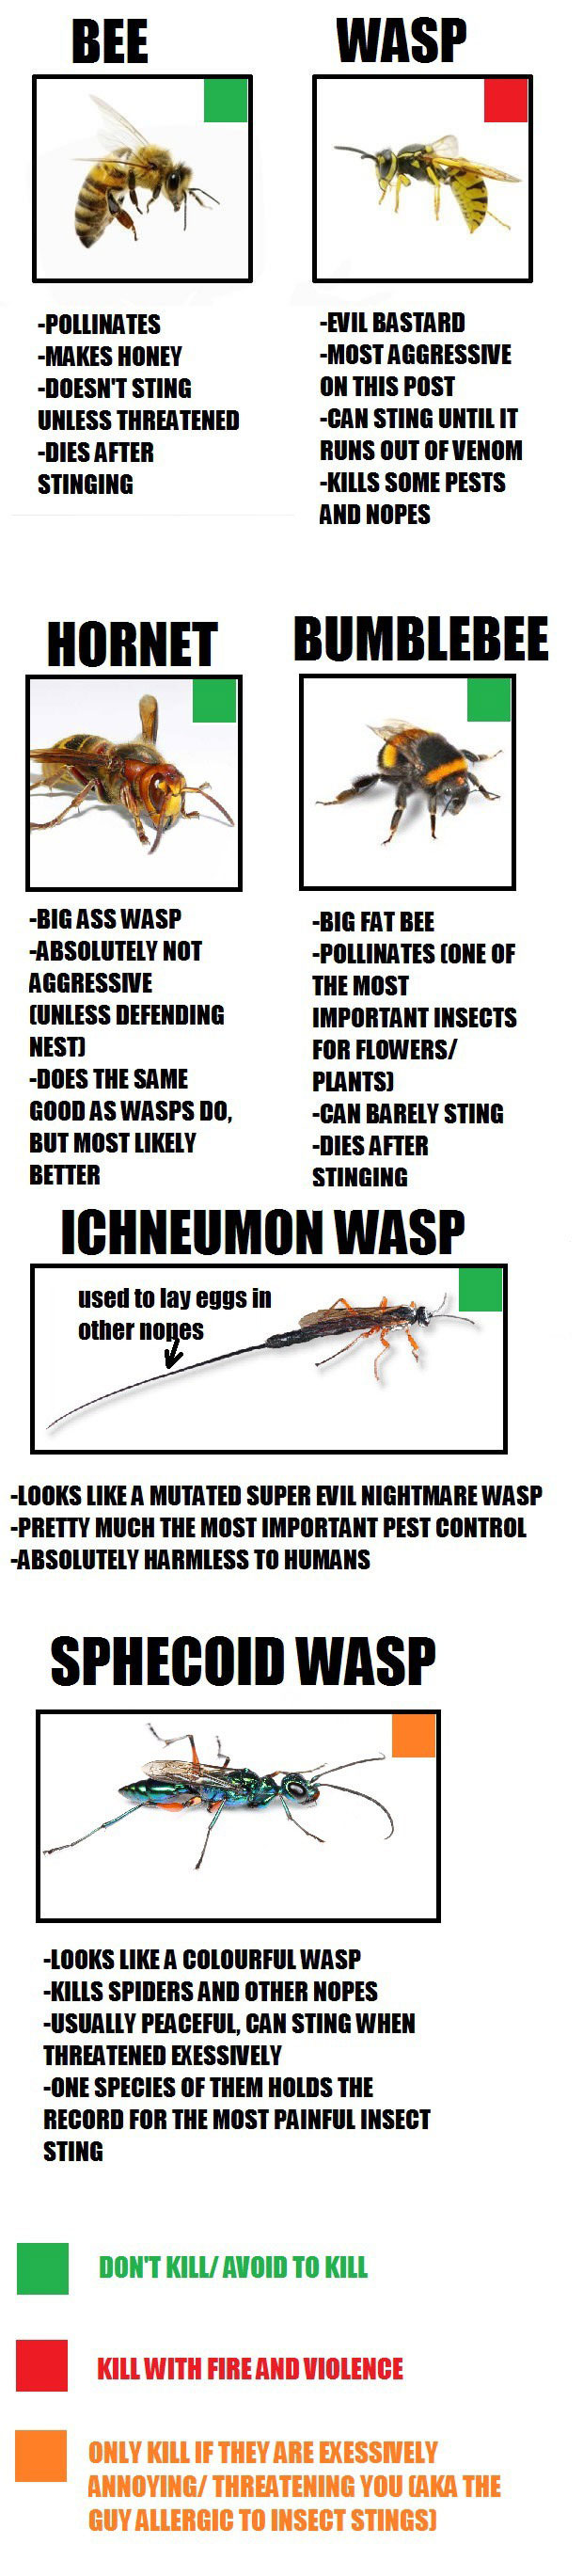 a guide to bees wasps and other similar insects